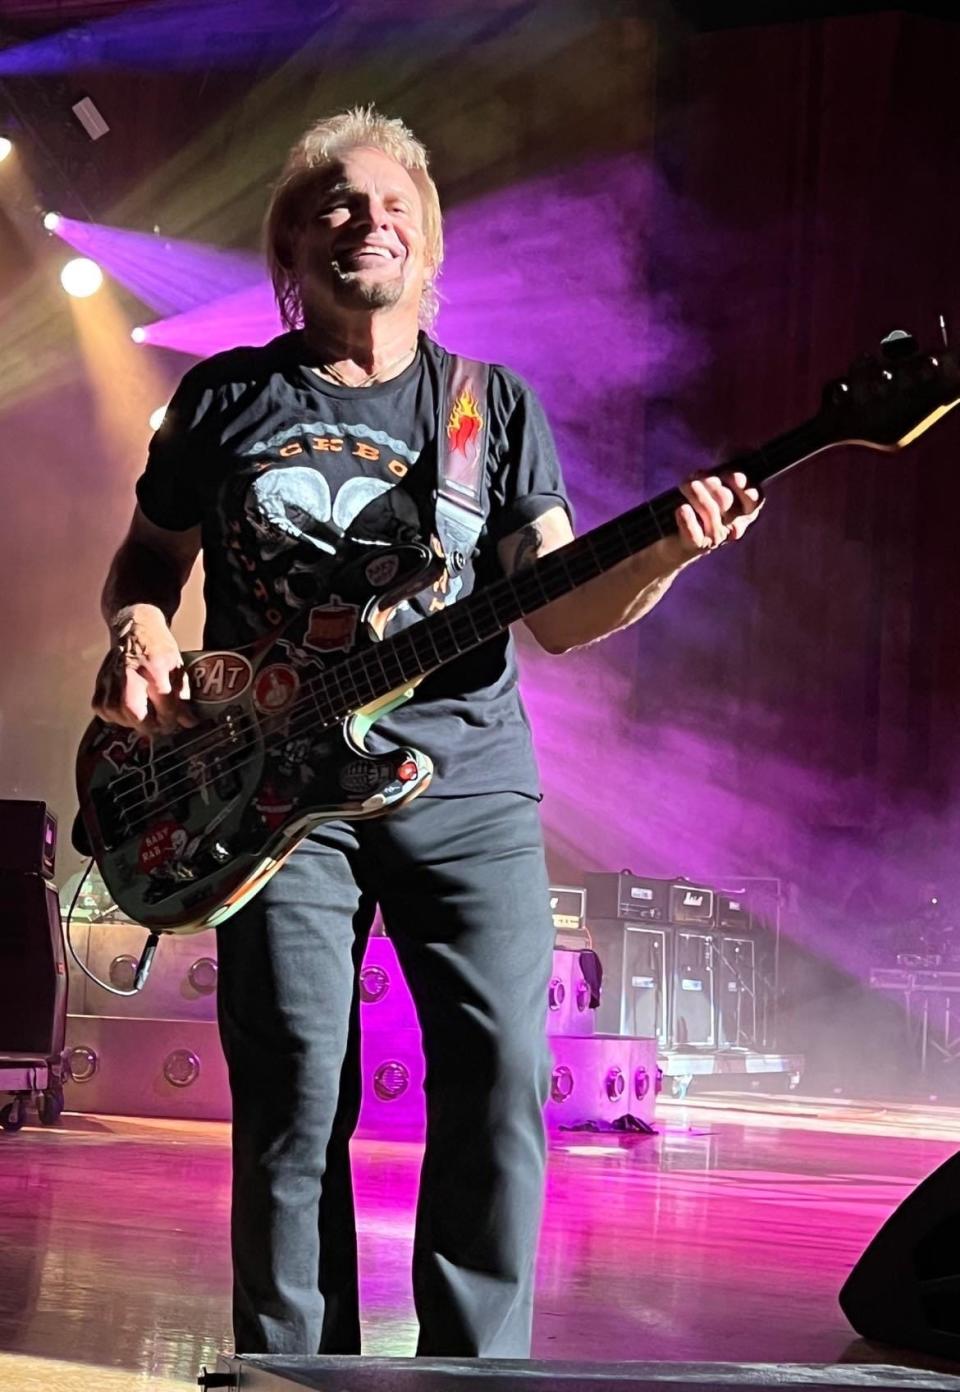 Michael Anthony, former bassist for Van Halen, performs with Sammy Hagar earlier this summer at The Circle's concert at Blossom Music Center.